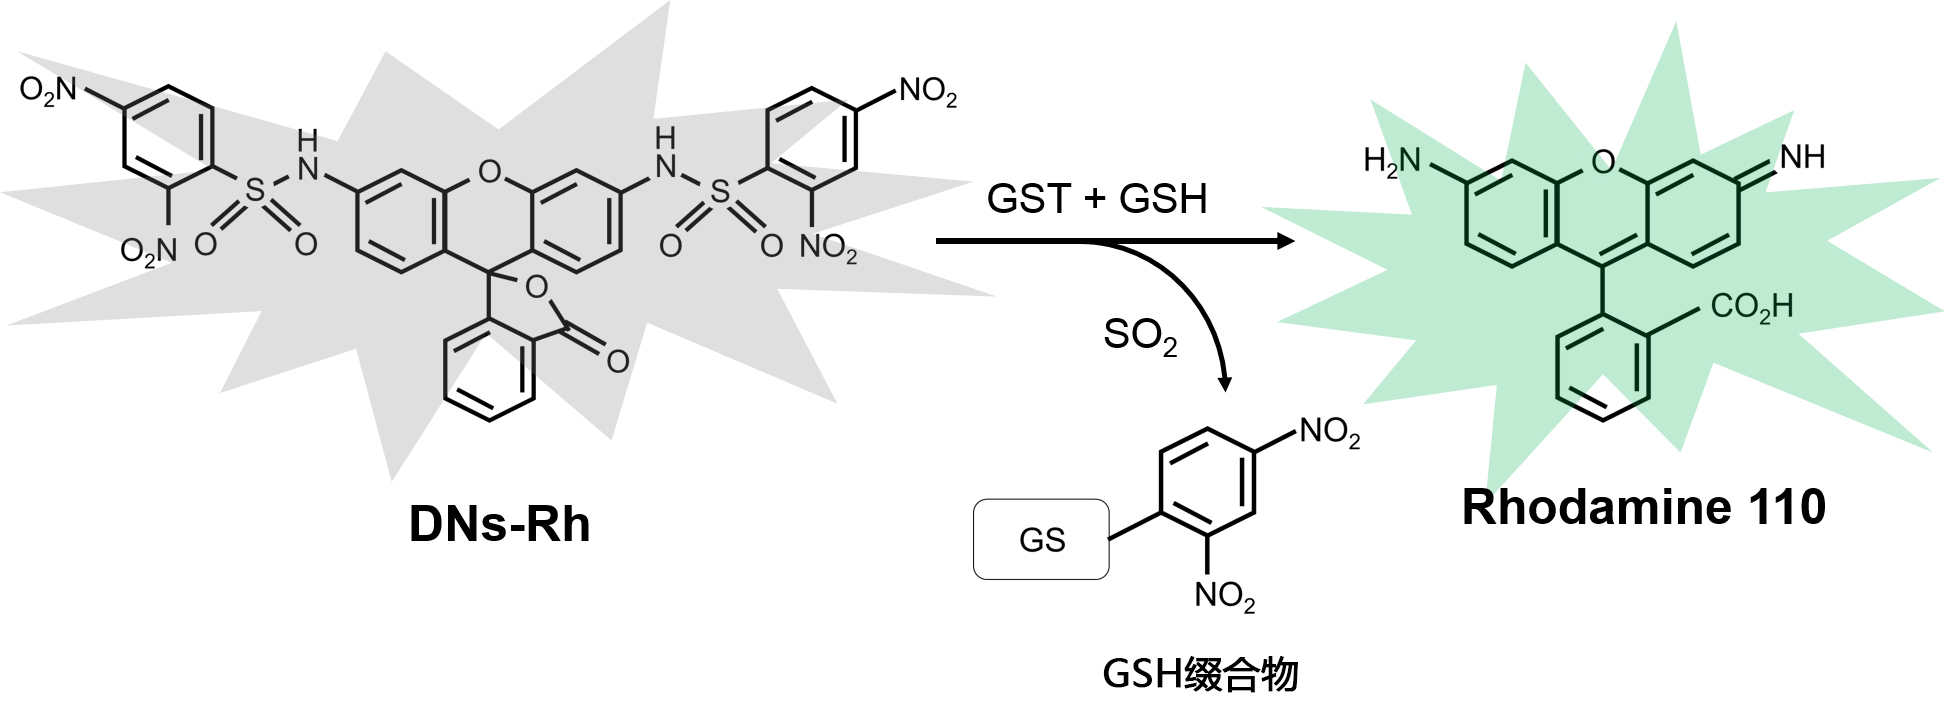 DNs-Rh ＜Cell-based GST Activity Assay Reagent＞                              可用于活细胞的GST活性检测探针